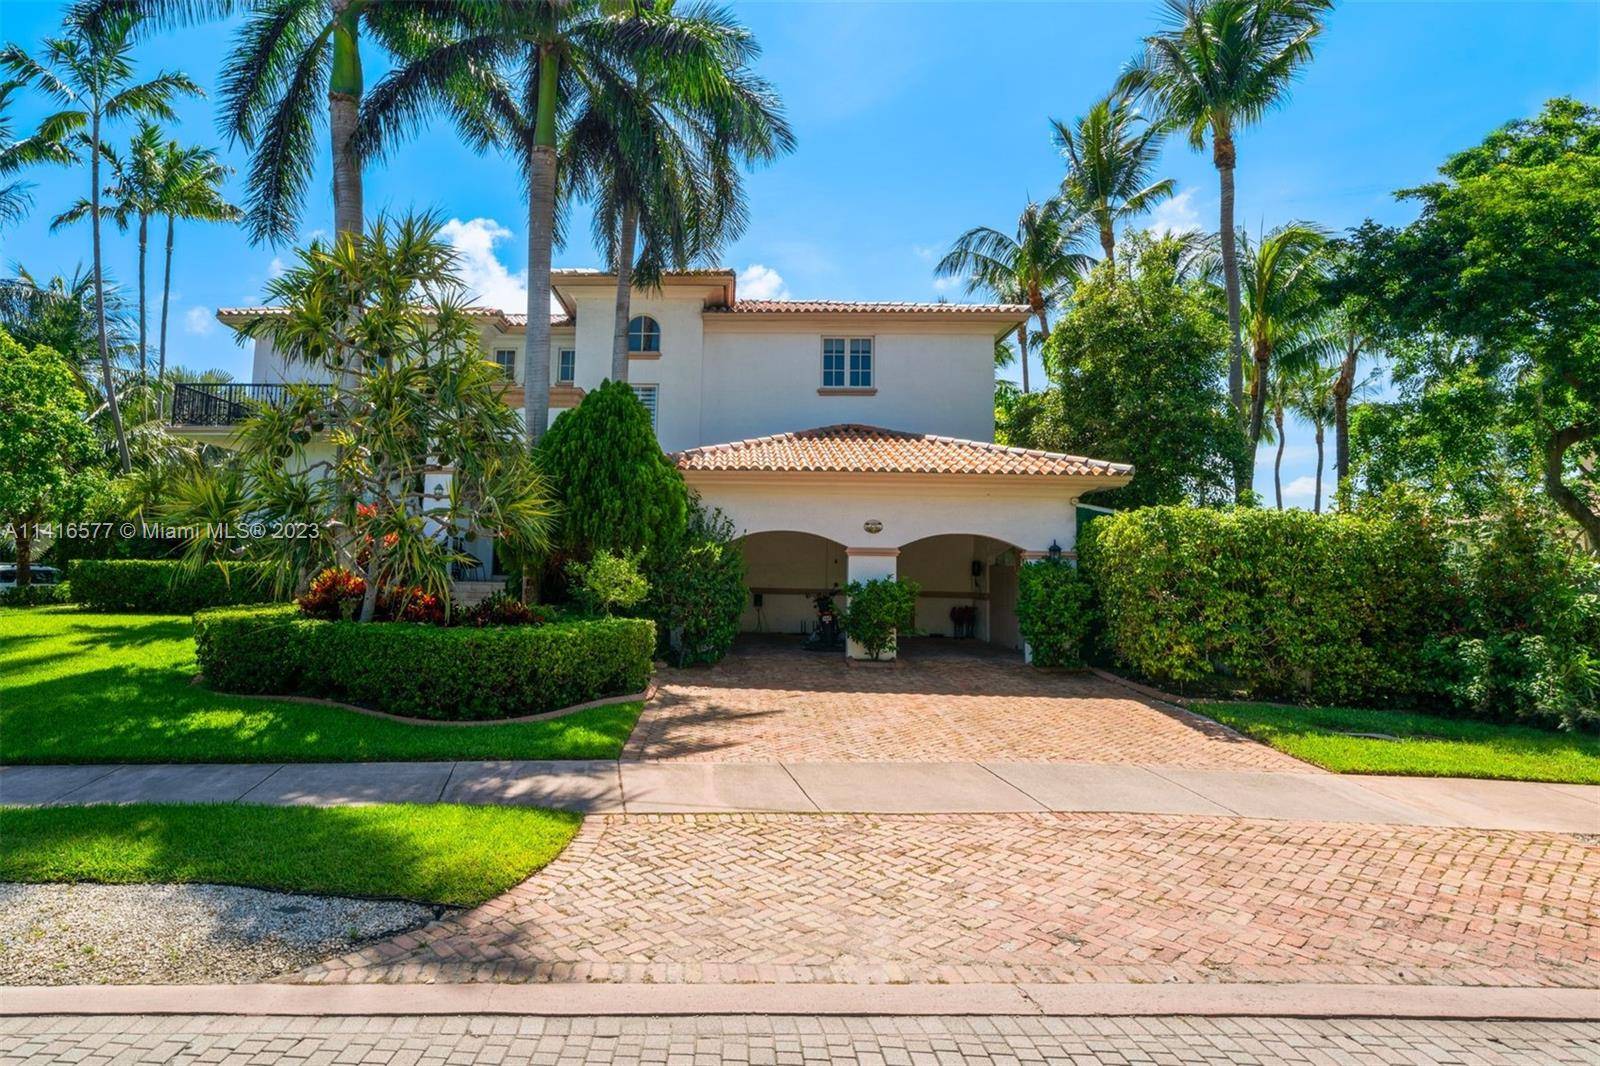 Stunning residence that boasts an enviable location with an oversized corner lot of 9, 000 Sq Ft on the most desirable street, Harbor Drive.